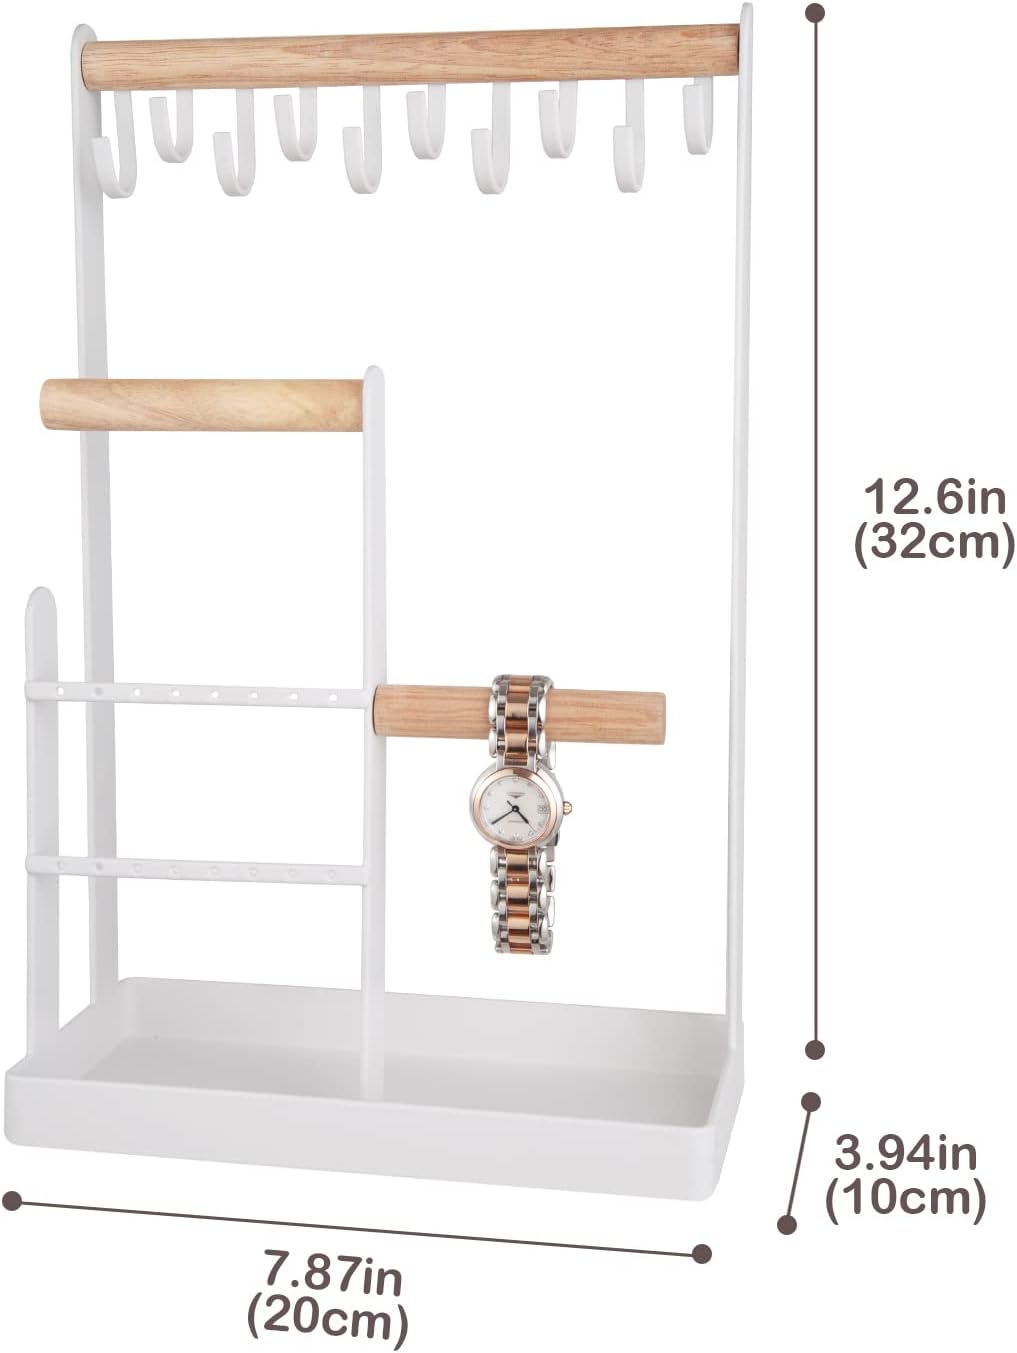 ProCase Jewelry Organizer Stand Necklace Holder, 4-Tier Jewelry Tower Rack with Earring Tray, 10 Hooks Necklaces Hanging Small Jewelry Display Storage Tree for Bracelets Earrings Rings Watches -White